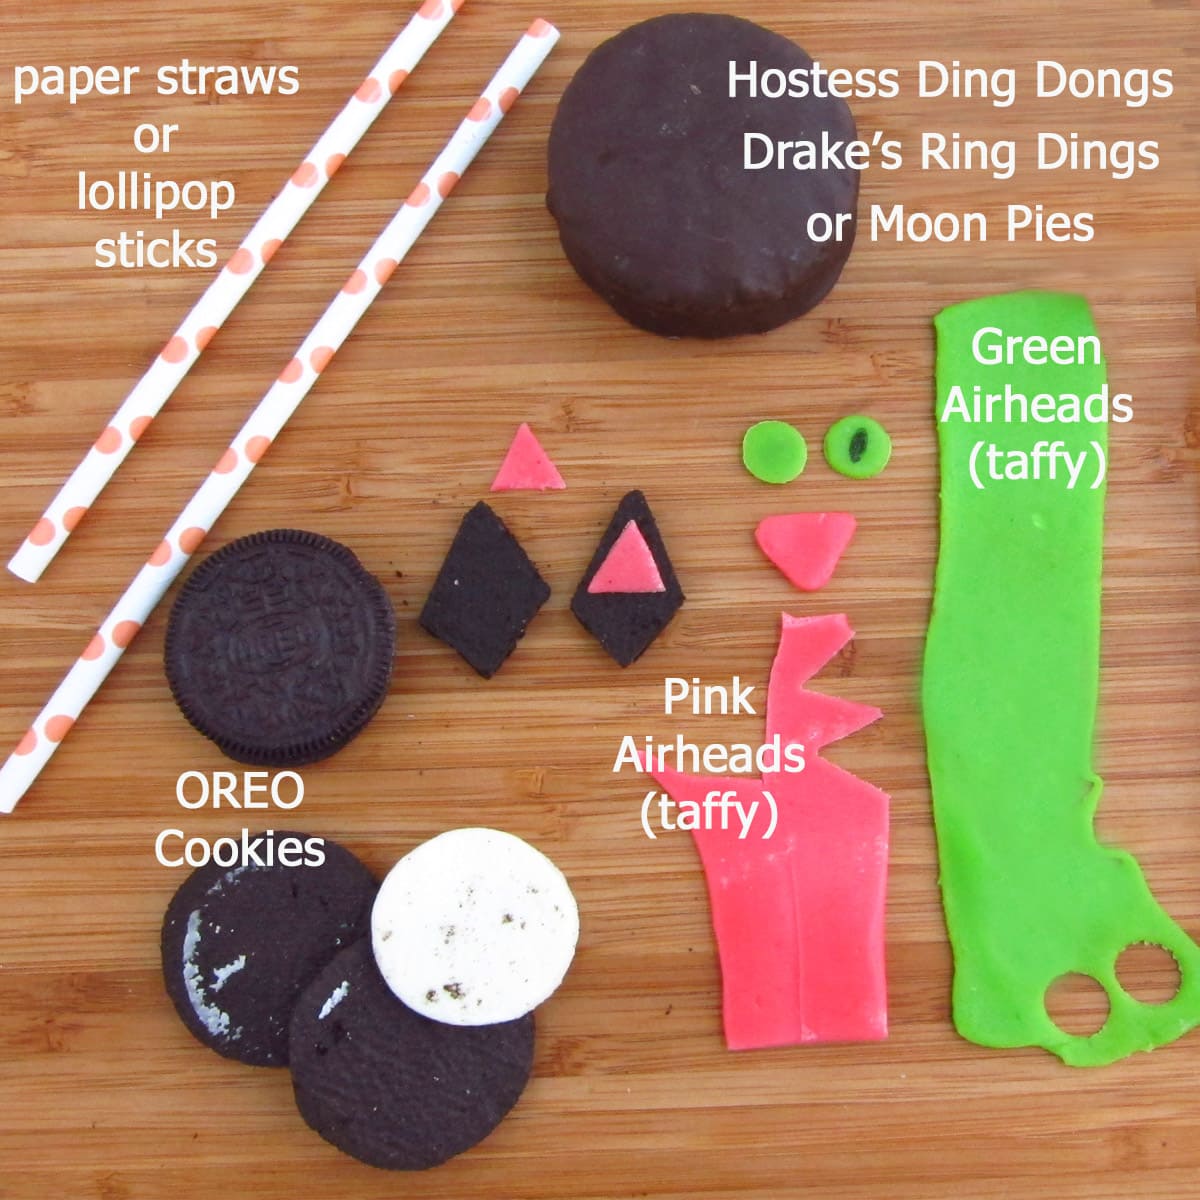 black cat cakes ingredients including chocolate snack cakes, OREO cookies, and pink & green AirHeads. 